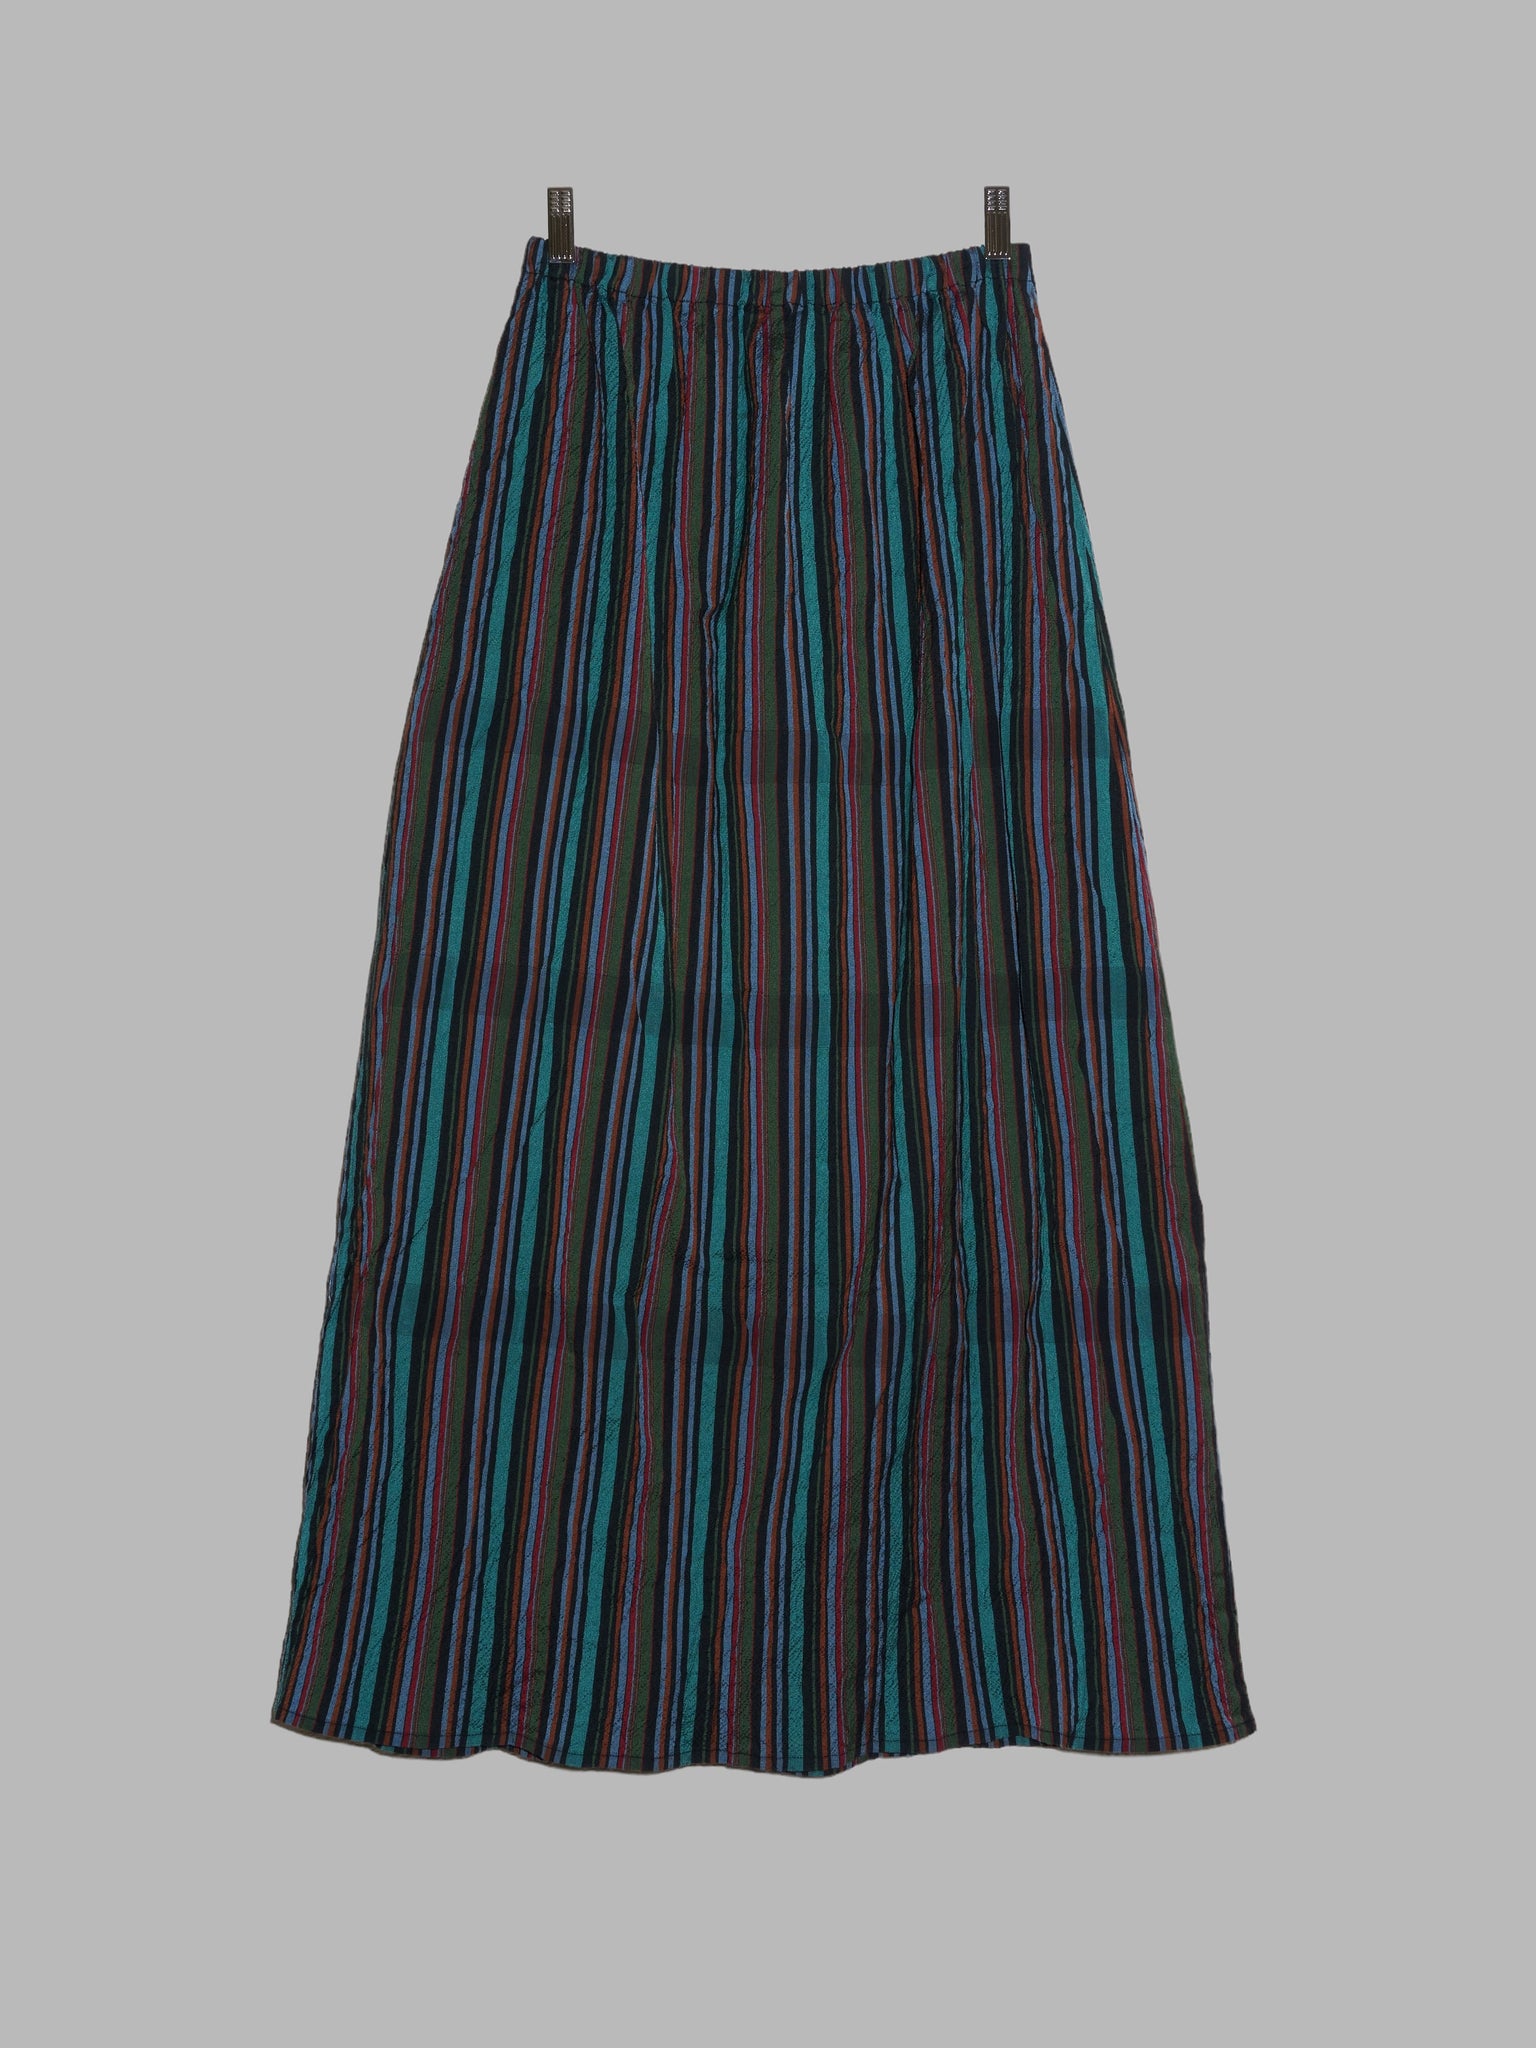 Issey Miyake A-POC multicolour striped cotton maxi skirt - size 2 M S